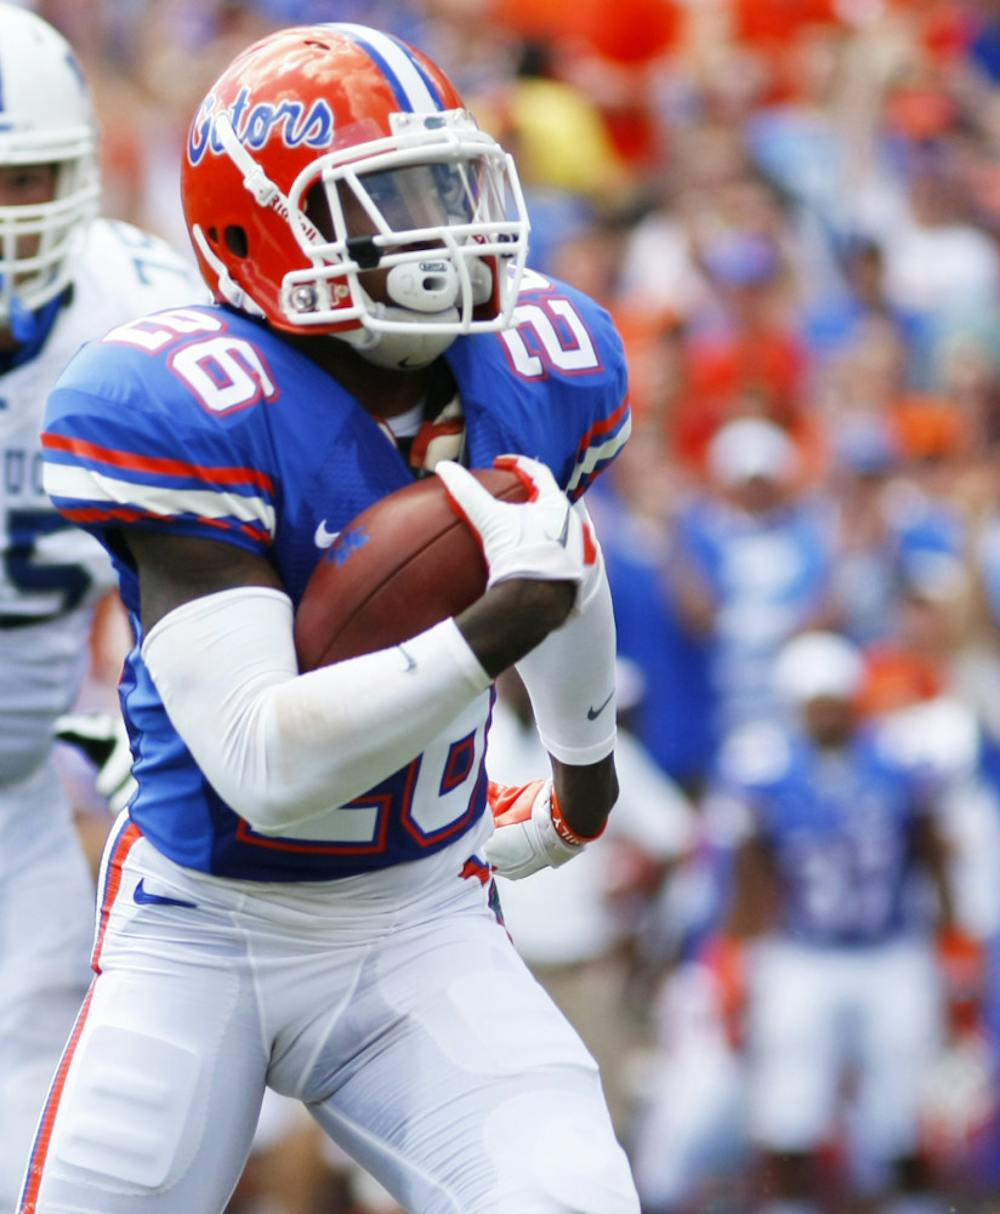 <p>Sophomore defensive back De'Ante Saunders returns a interception during Florida's 38-0 win against Kentucky at Ben Hill Griffin Stadium on Sept. 22. </p>